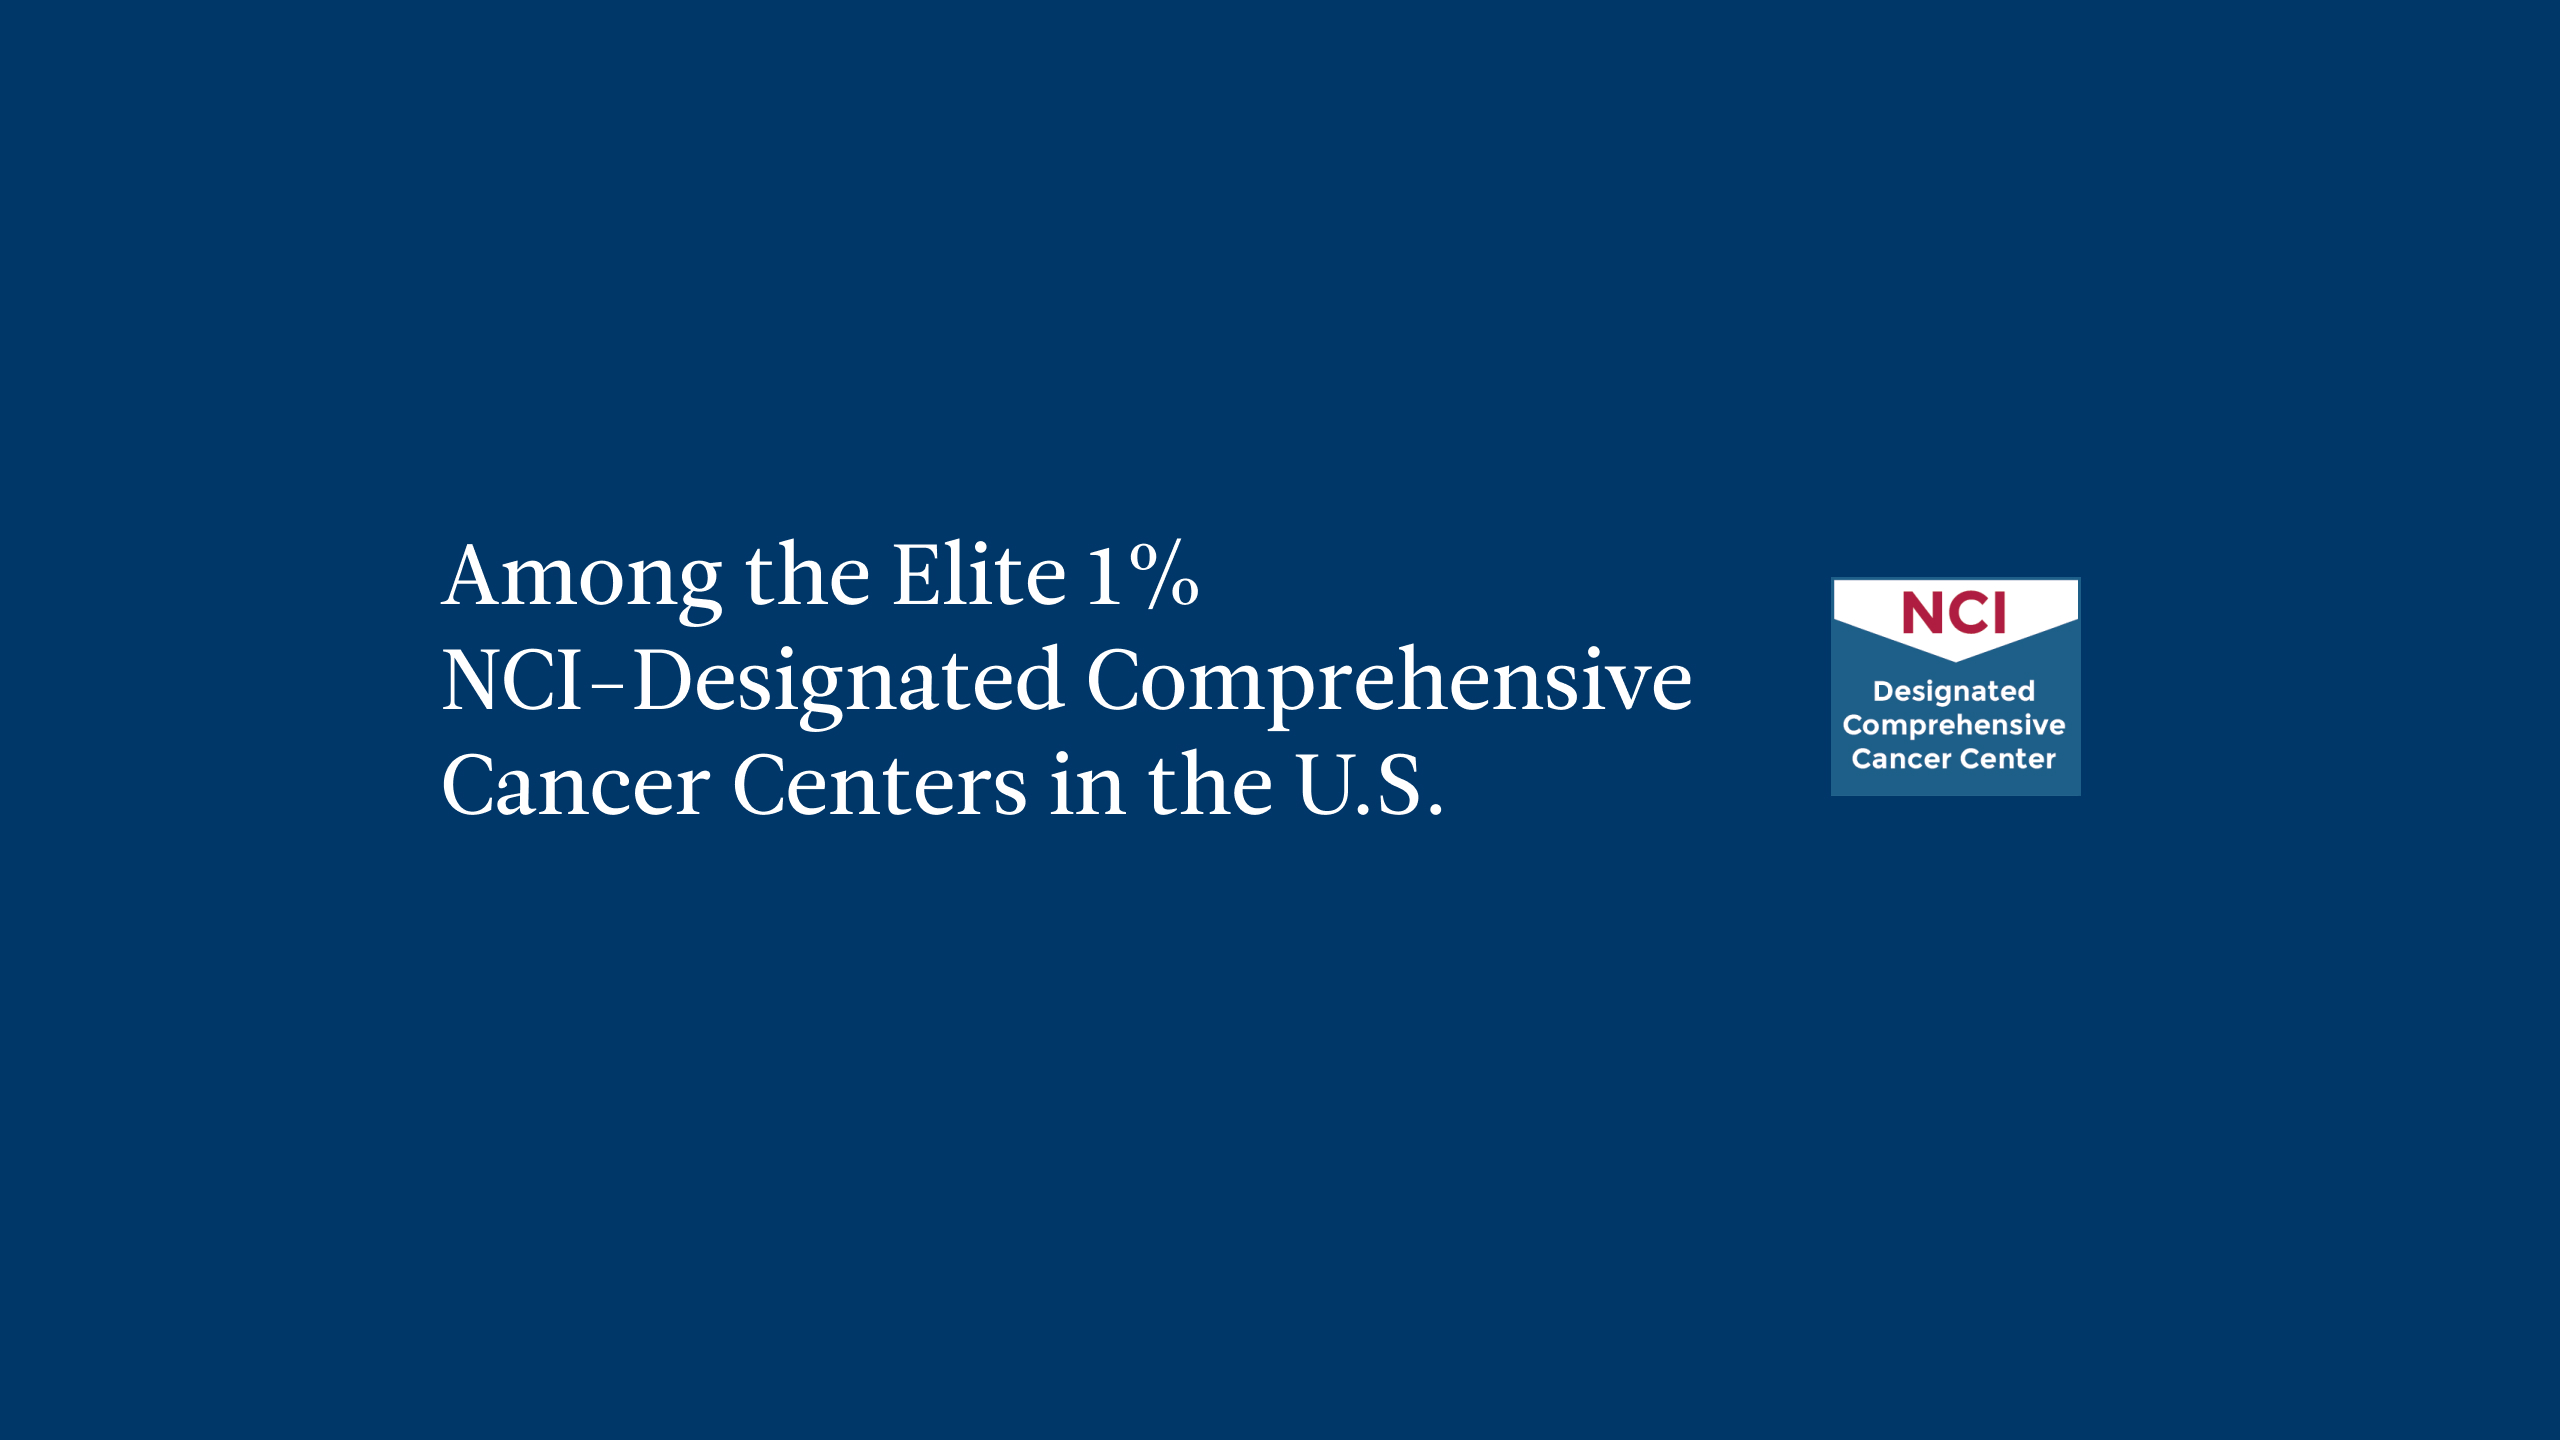 Among the Elite 1% NCI-Designated Comprehensive Cancer Centers in the US